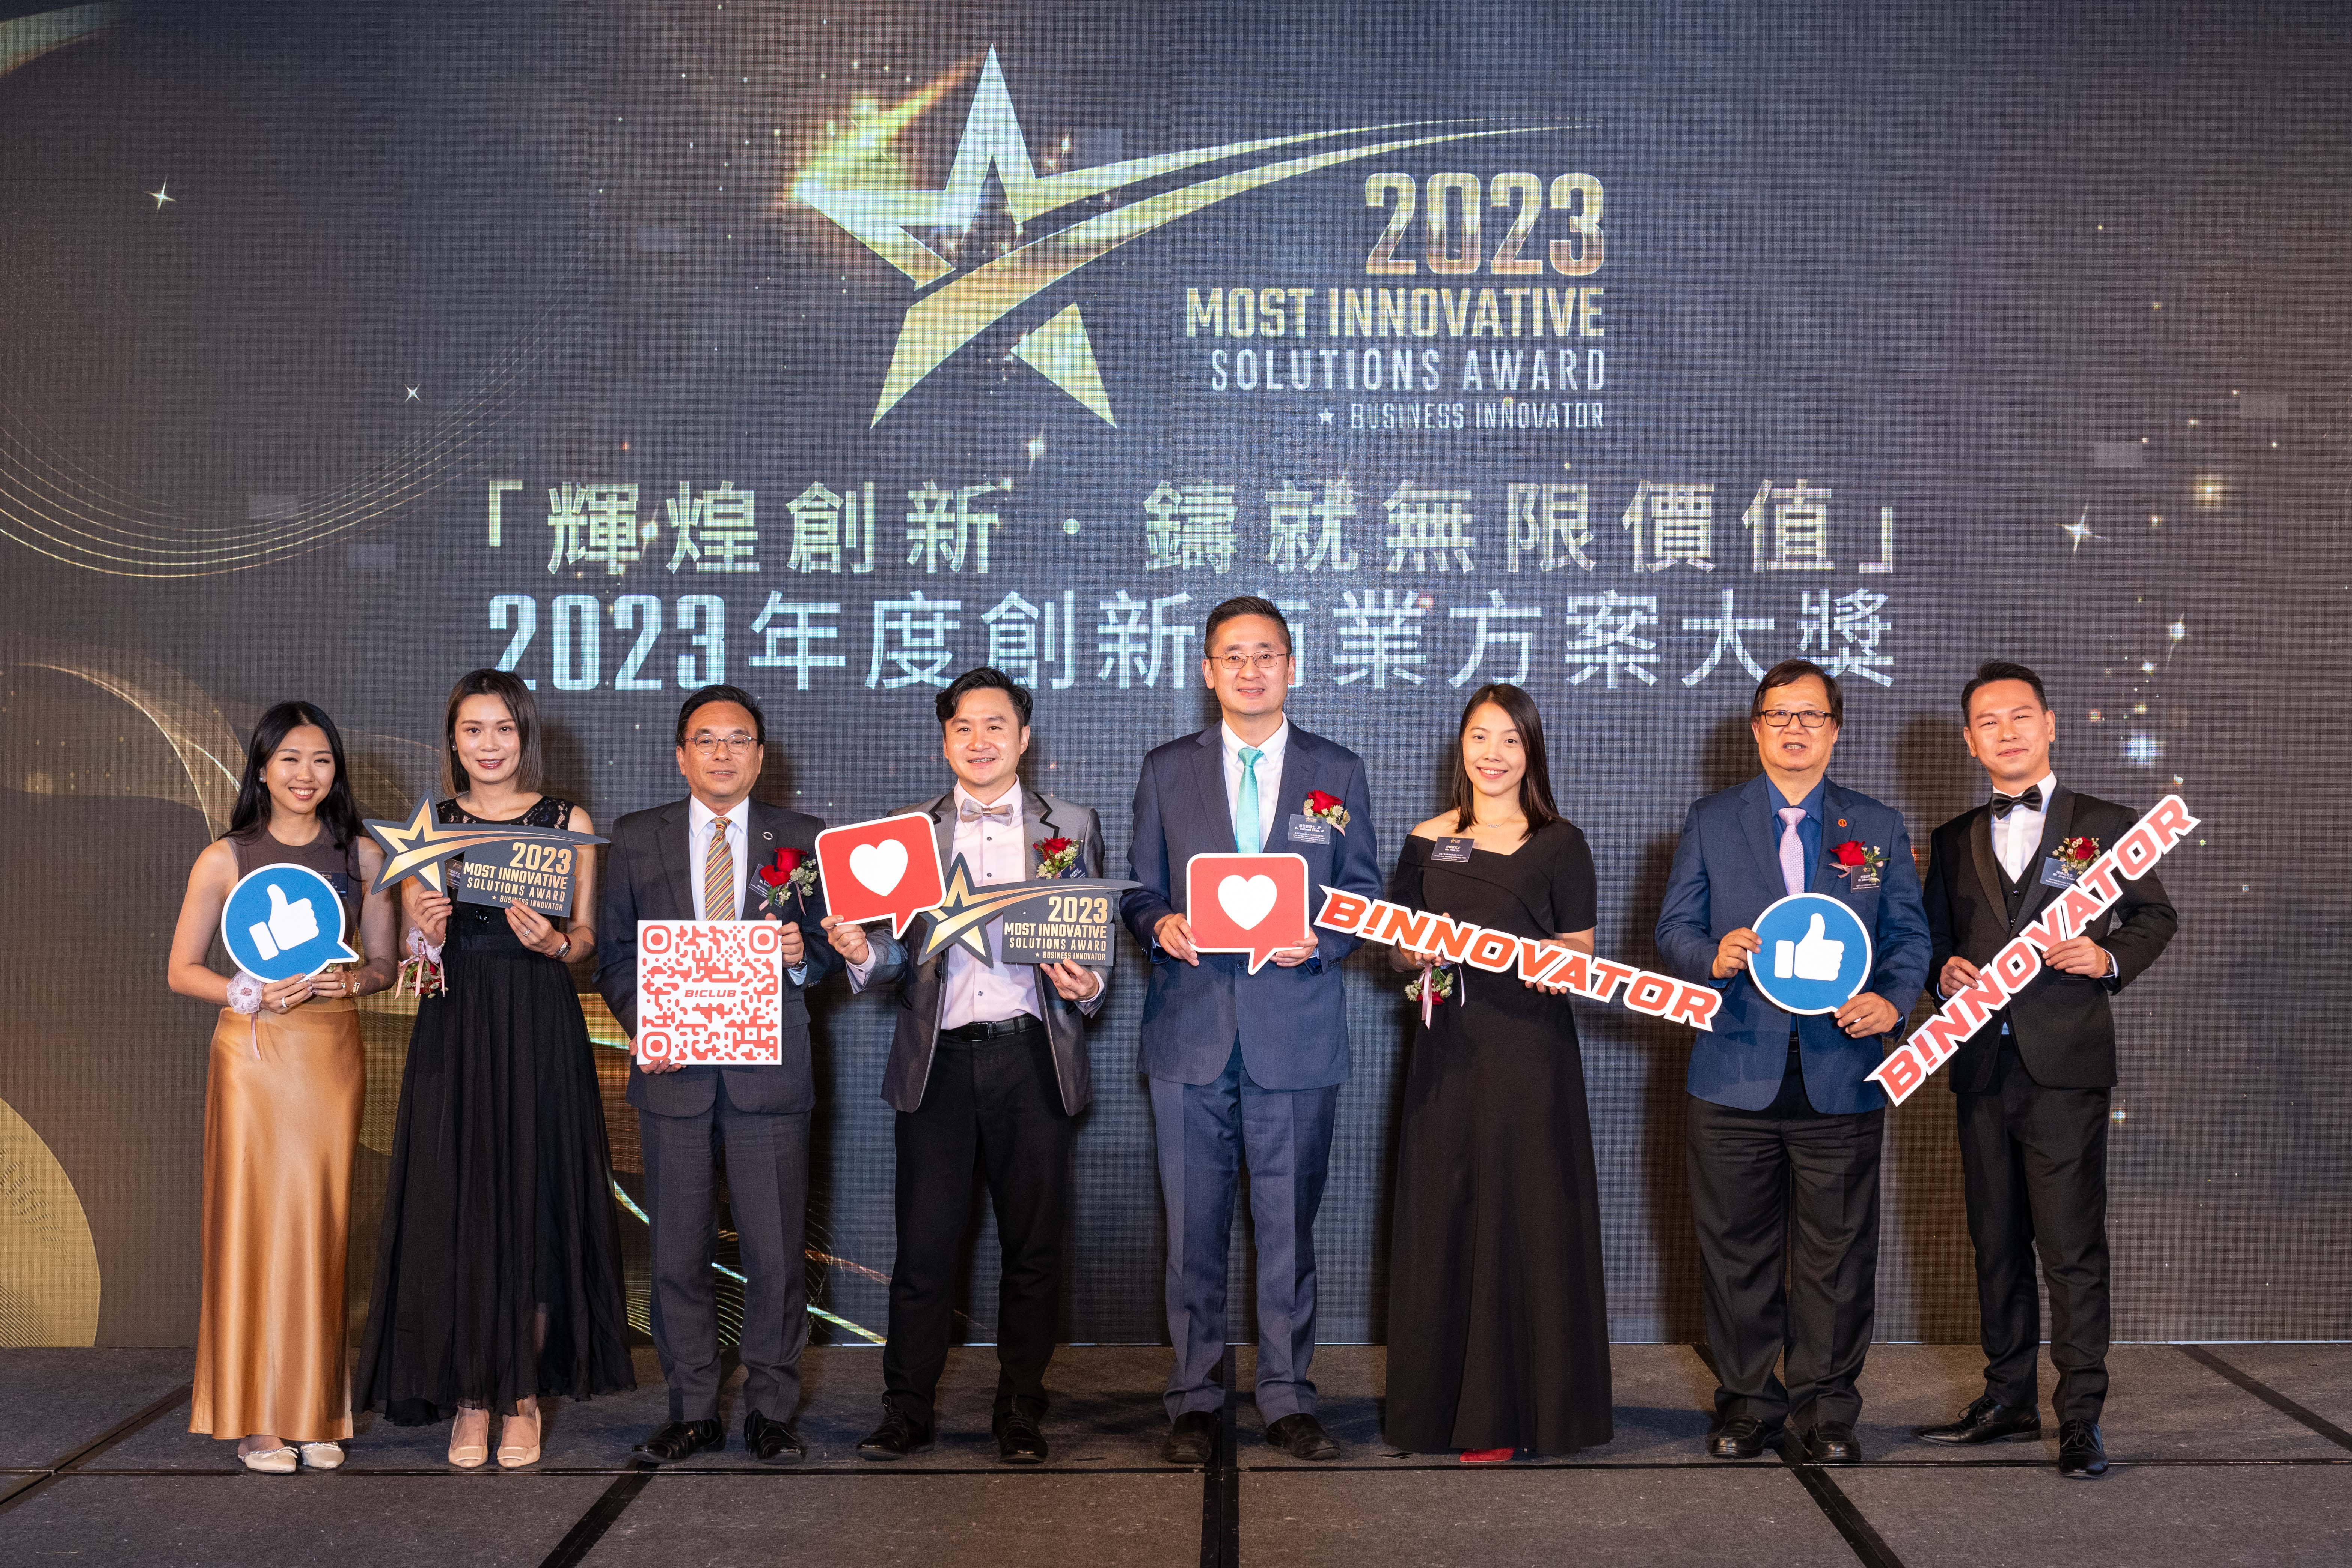 Ms. Fion Leung, Co-Founder & CEO, Time Auction, Ms. Jessica Wong, Executive Director, Joint PR Consultants Limited, Mr. Kenneth Ngok, Vice President, Hong Kong Greater China SME Alliance Association, Mr. LU Chin Yung, Senior Manager, StartmeupHK, Sector Specialists Group, Invest Hong Kong, Dr. CHAN Pak Li, Bernard, JP, The Government of the Hong Kong Special Administrative Region Under Secretary of the Hong Kong Commerce and Economic Development Bureau, Ms. Ada Lin, Division Head, Innovation and Strategy, HSBC Commercial Banking, Dr. Edward Lam, Chairman, Hong Kong SME Development Federation, Mr. Jingo Chan, Managing Director of BUSINESS INNOVATOR